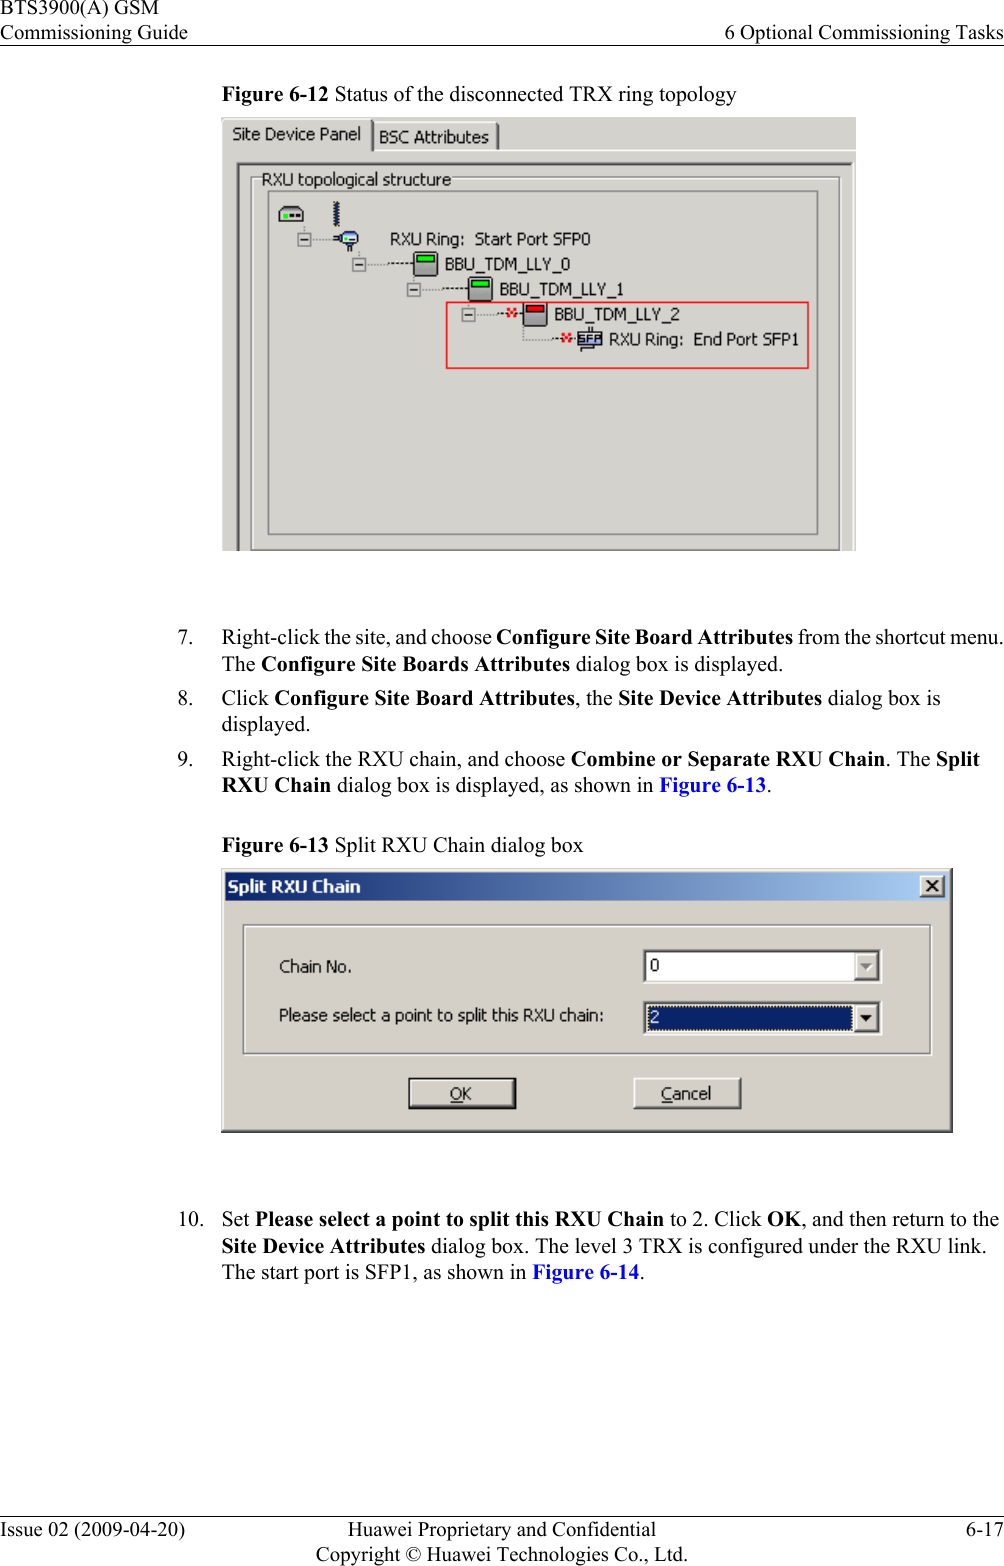 Figure 6-12 Status of the disconnected TRX ring topology 7. Right-click the site, and choose Configure Site Board Attributes from the shortcut menu.The Configure Site Boards Attributes dialog box is displayed.8. Click Configure Site Board Attributes, the Site Device Attributes dialog box isdisplayed.9. Right-click the RXU chain, and choose Combine or Separate RXU Chain. The SplitRXU Chain dialog box is displayed, as shown in Figure 6-13.Figure 6-13 Split RXU Chain dialog box 10. Set Please select a point to split this RXU Chain to 2. Click OK, and then return to theSite Device Attributes dialog box. The level 3 TRX is configured under the RXU link.The start port is SFP1, as shown in Figure 6-14.BTS3900(A) GSMCommissioning Guide 6 Optional Commissioning TasksIssue 02 (2009-04-20) Huawei Proprietary and ConfidentialCopyright © Huawei Technologies Co., Ltd.6-17